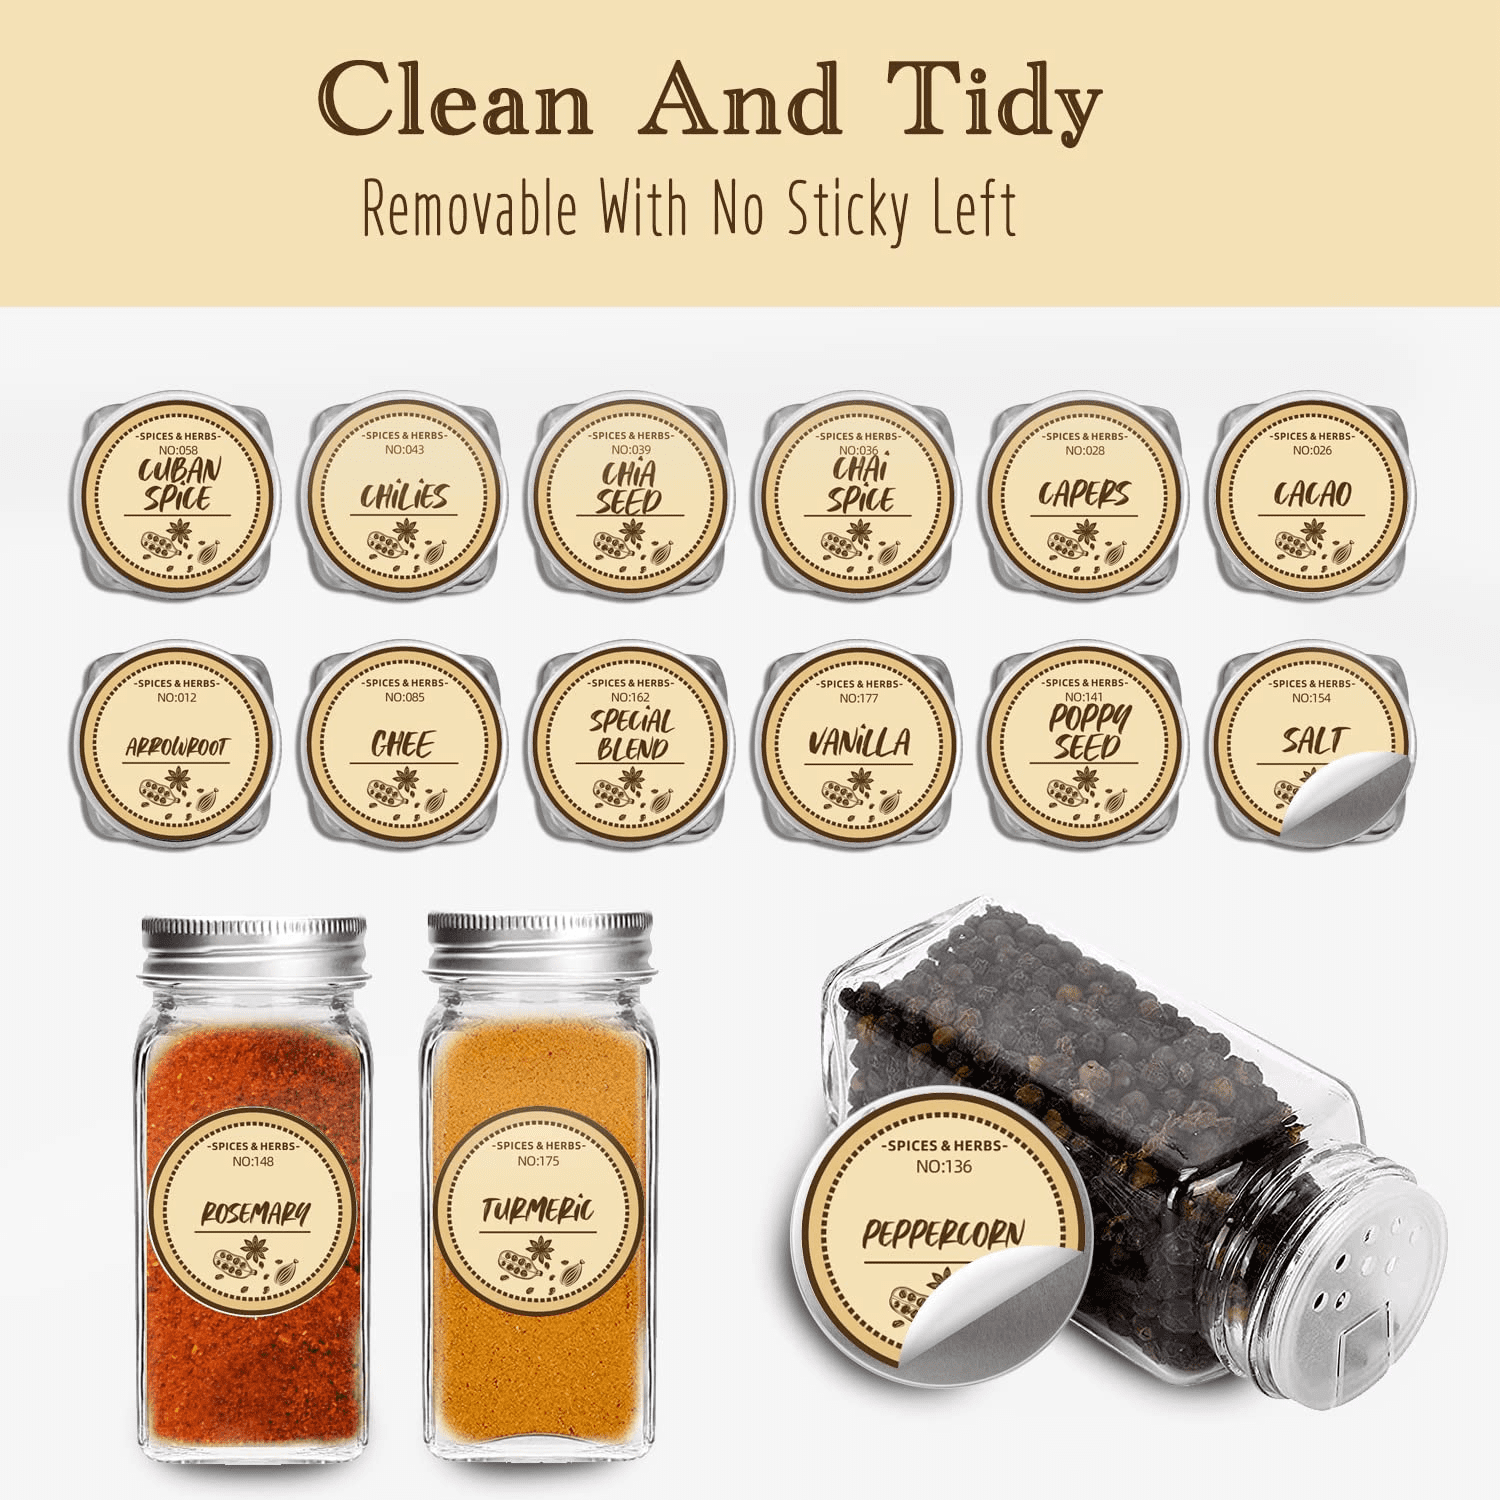 225 PCS Spice Jar Labels, Does't Include Jars,184 Preprinted 41 Extra  Write-On Labels for DIY, Waterproof, Oil Resistant, No Residue Herb  Seasoning Labels for Kitchen Pantry. (1.18x2.2, Black) 